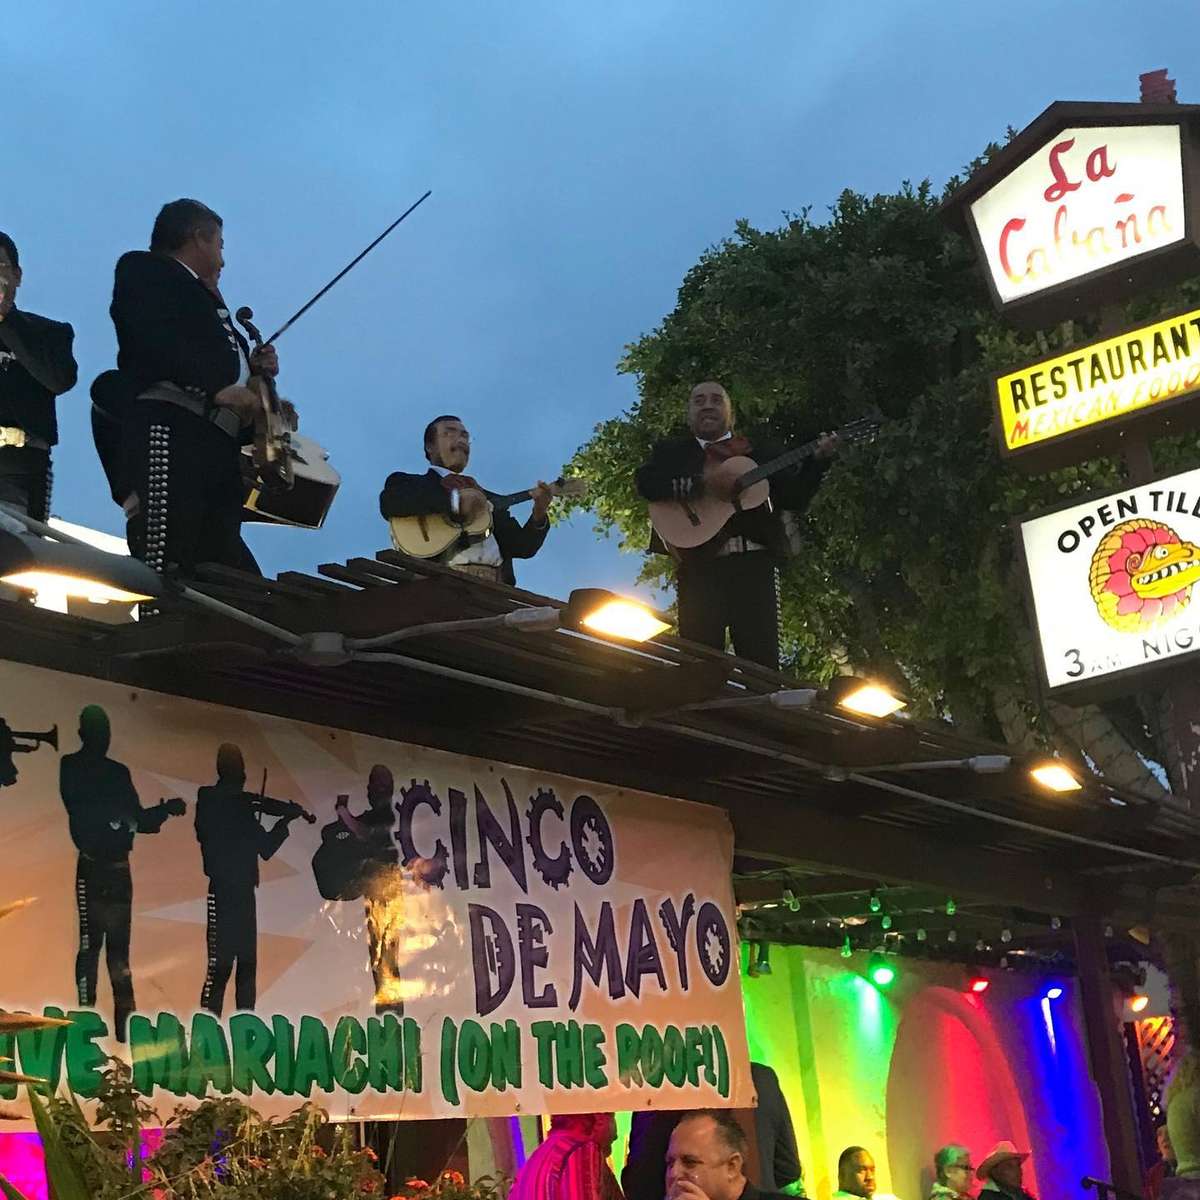 Mariachis on the roof